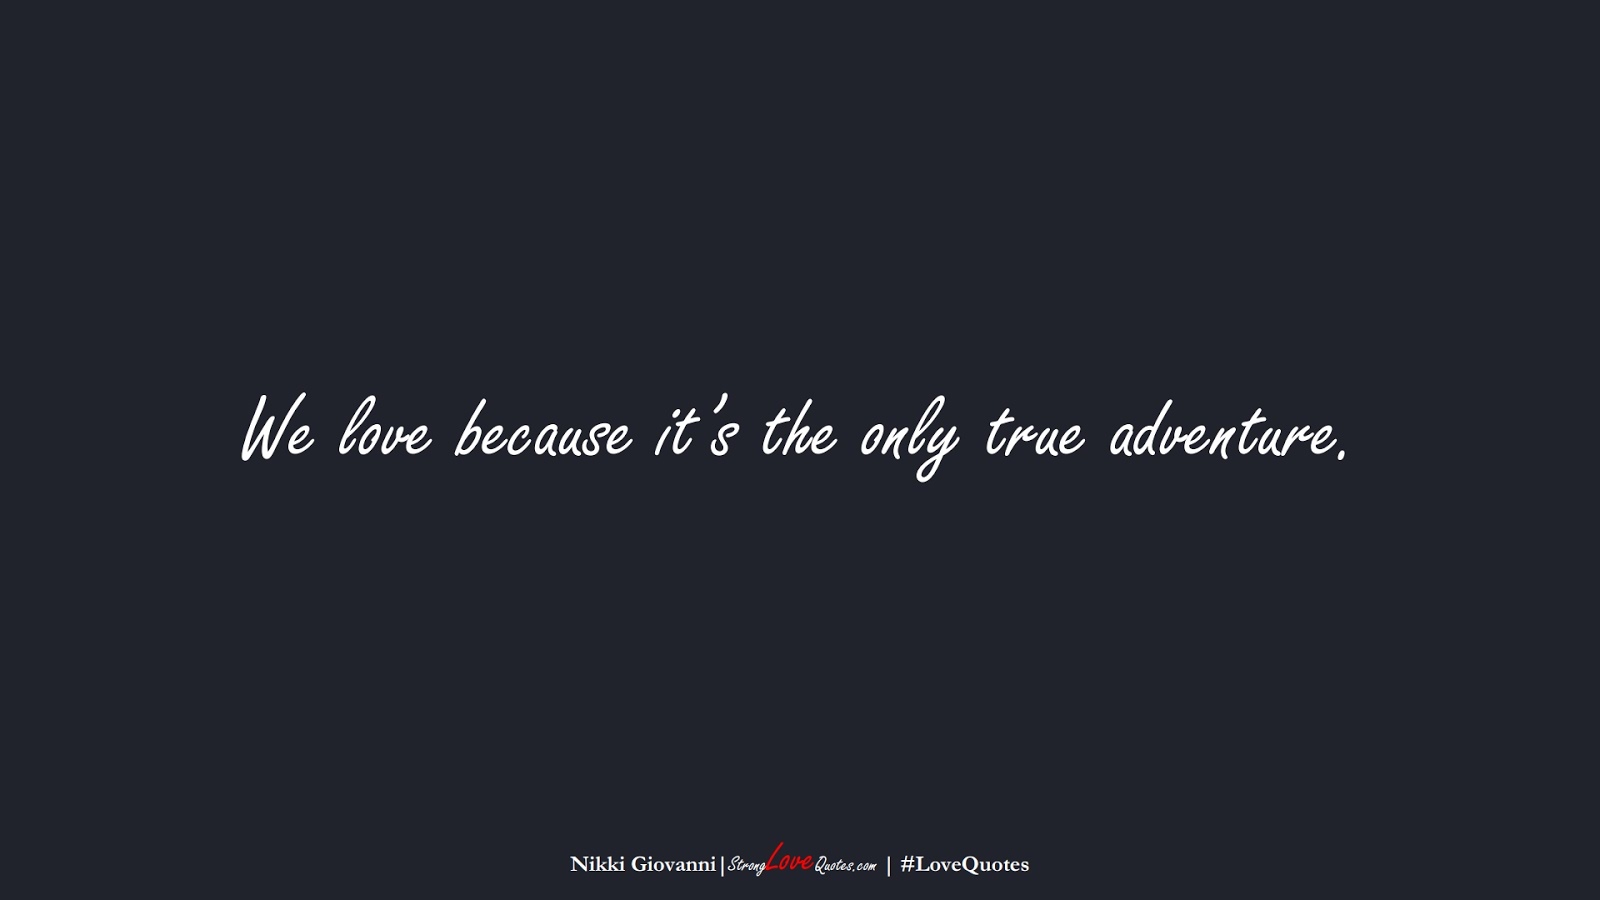 We love because it’s the only true adventure. (Nikki Giovanni);  #LoveQuotes